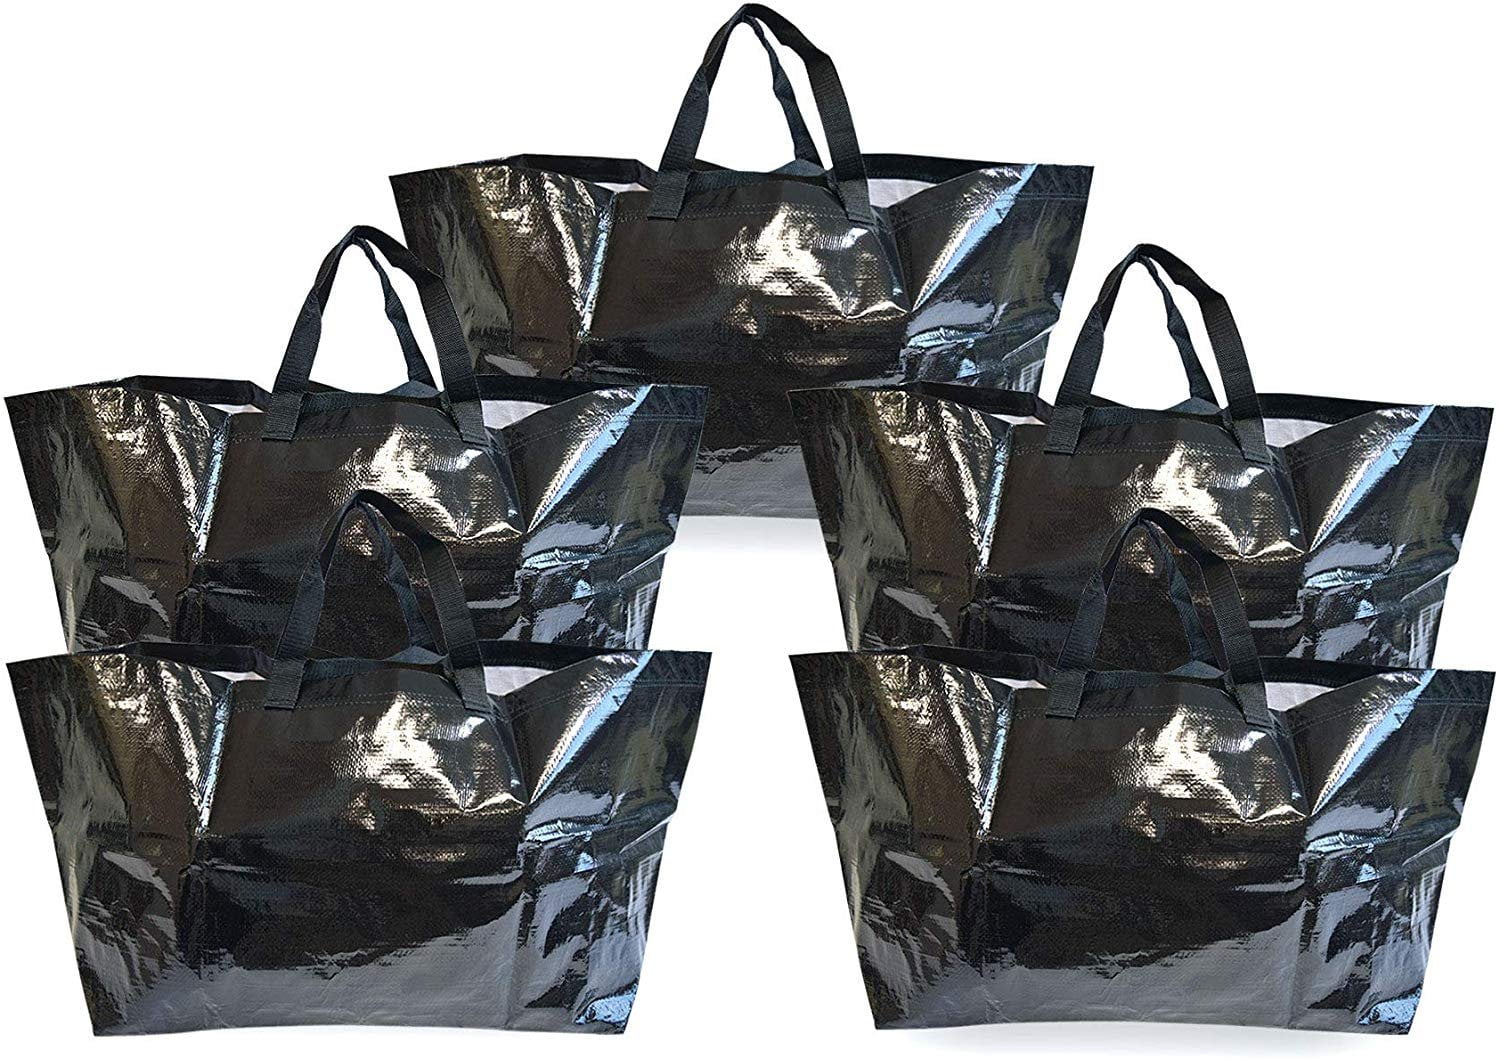 Prime Line Packaging 5 Pcs. Large Tote Bags for Carrying Bulk Items, Storage Bags, Extra Large ...